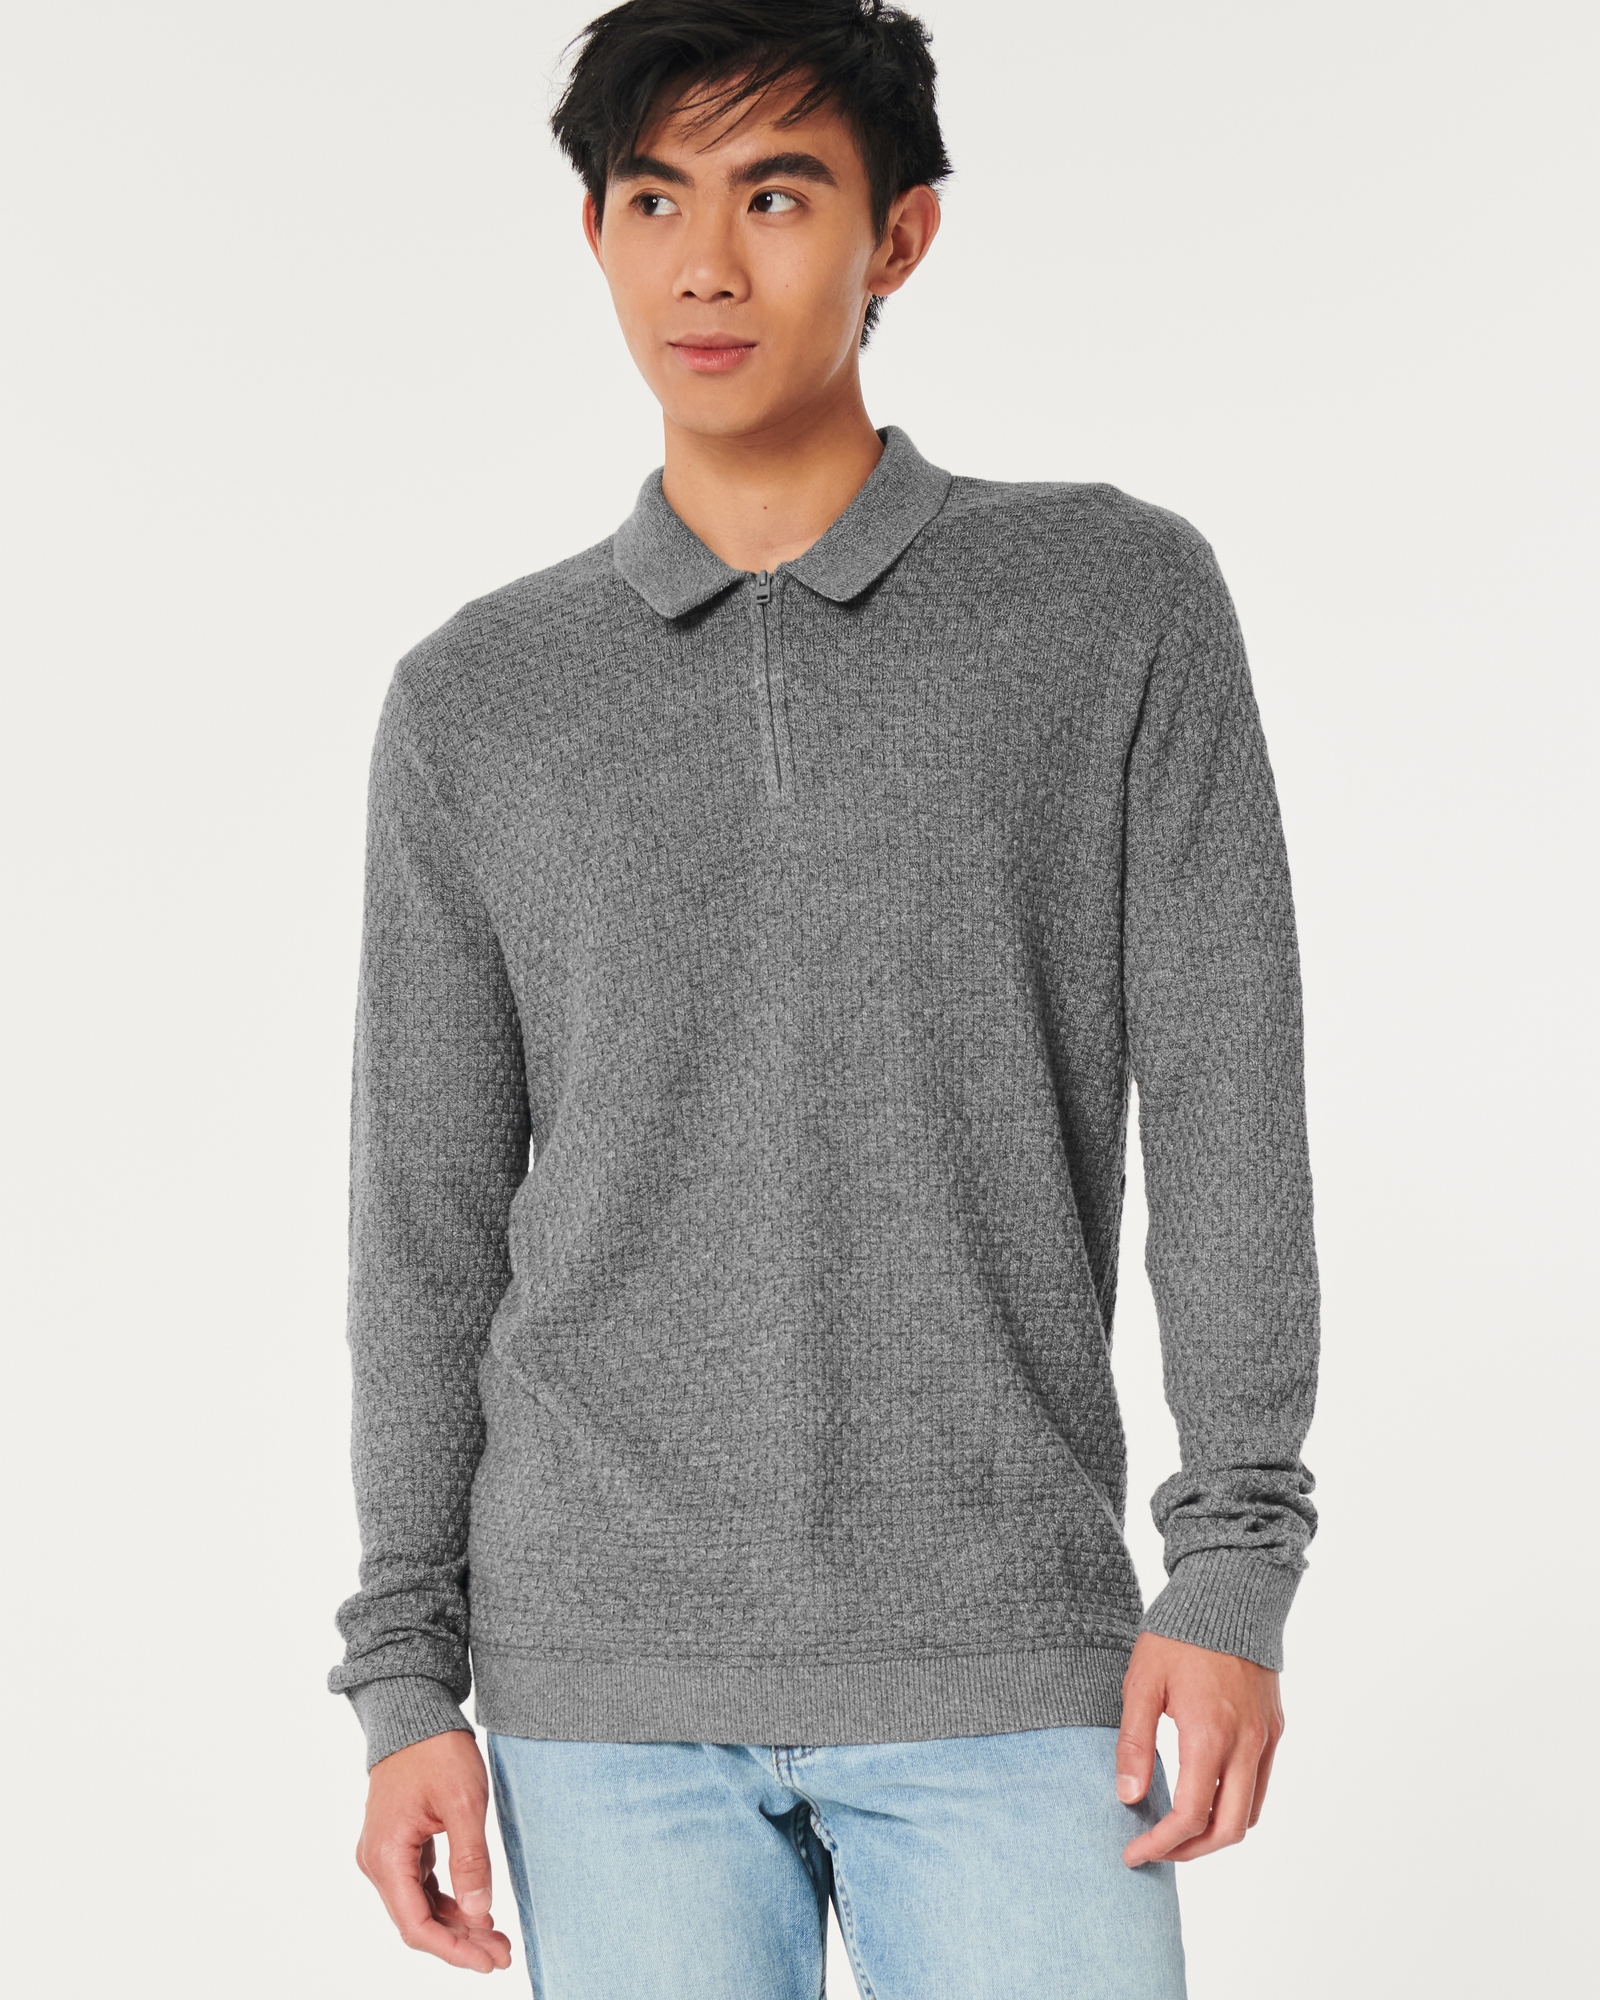 Men's Textured Long-Sleeve Sweater Polo, Men's Clearance